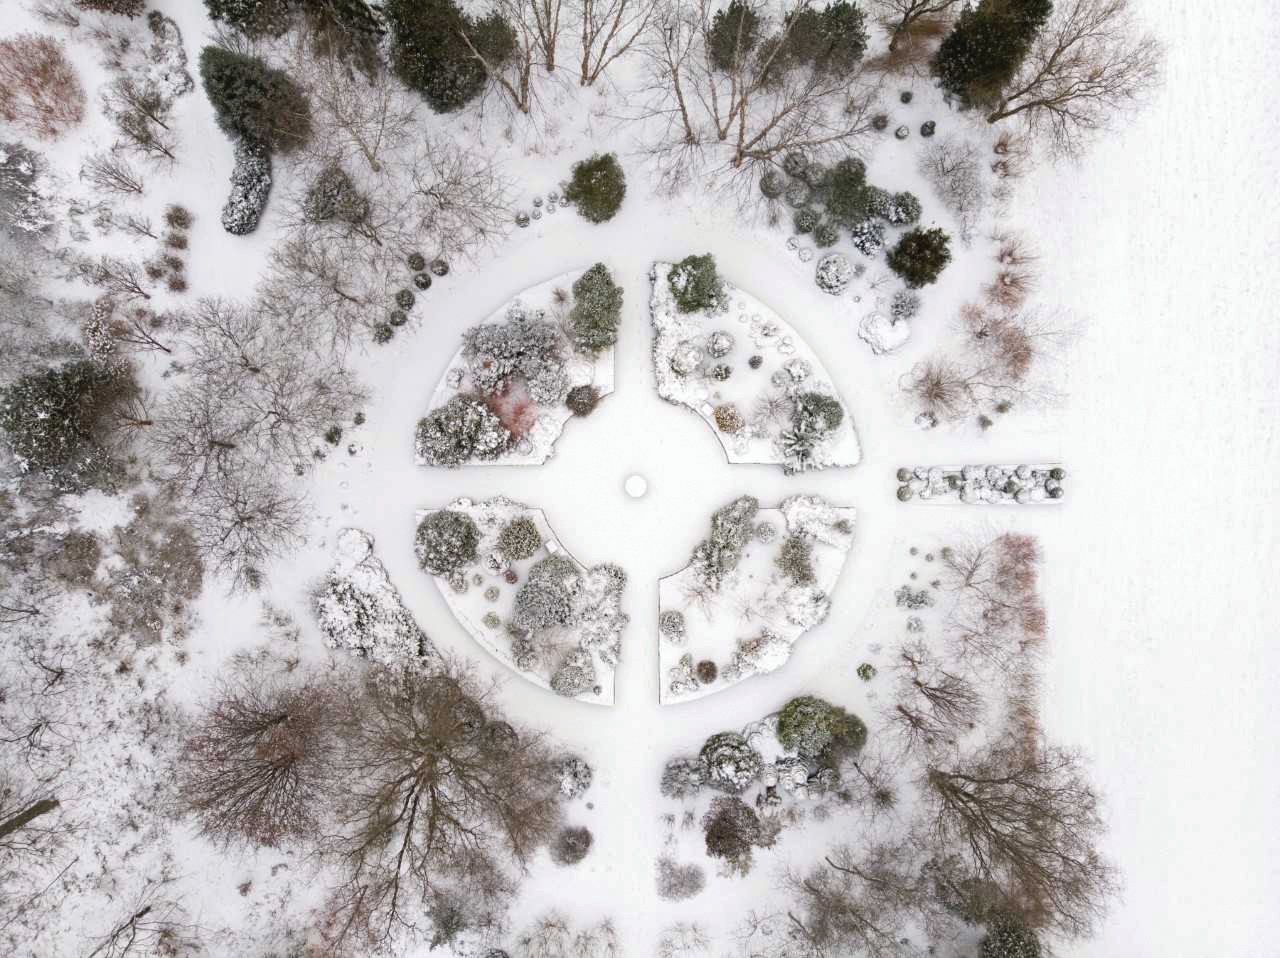 The winter garden at Cornell Botanic Gardens features a central courtyard and concentric circles. Evergreens, holly, and other plants are woven into solstice traditions around the world.